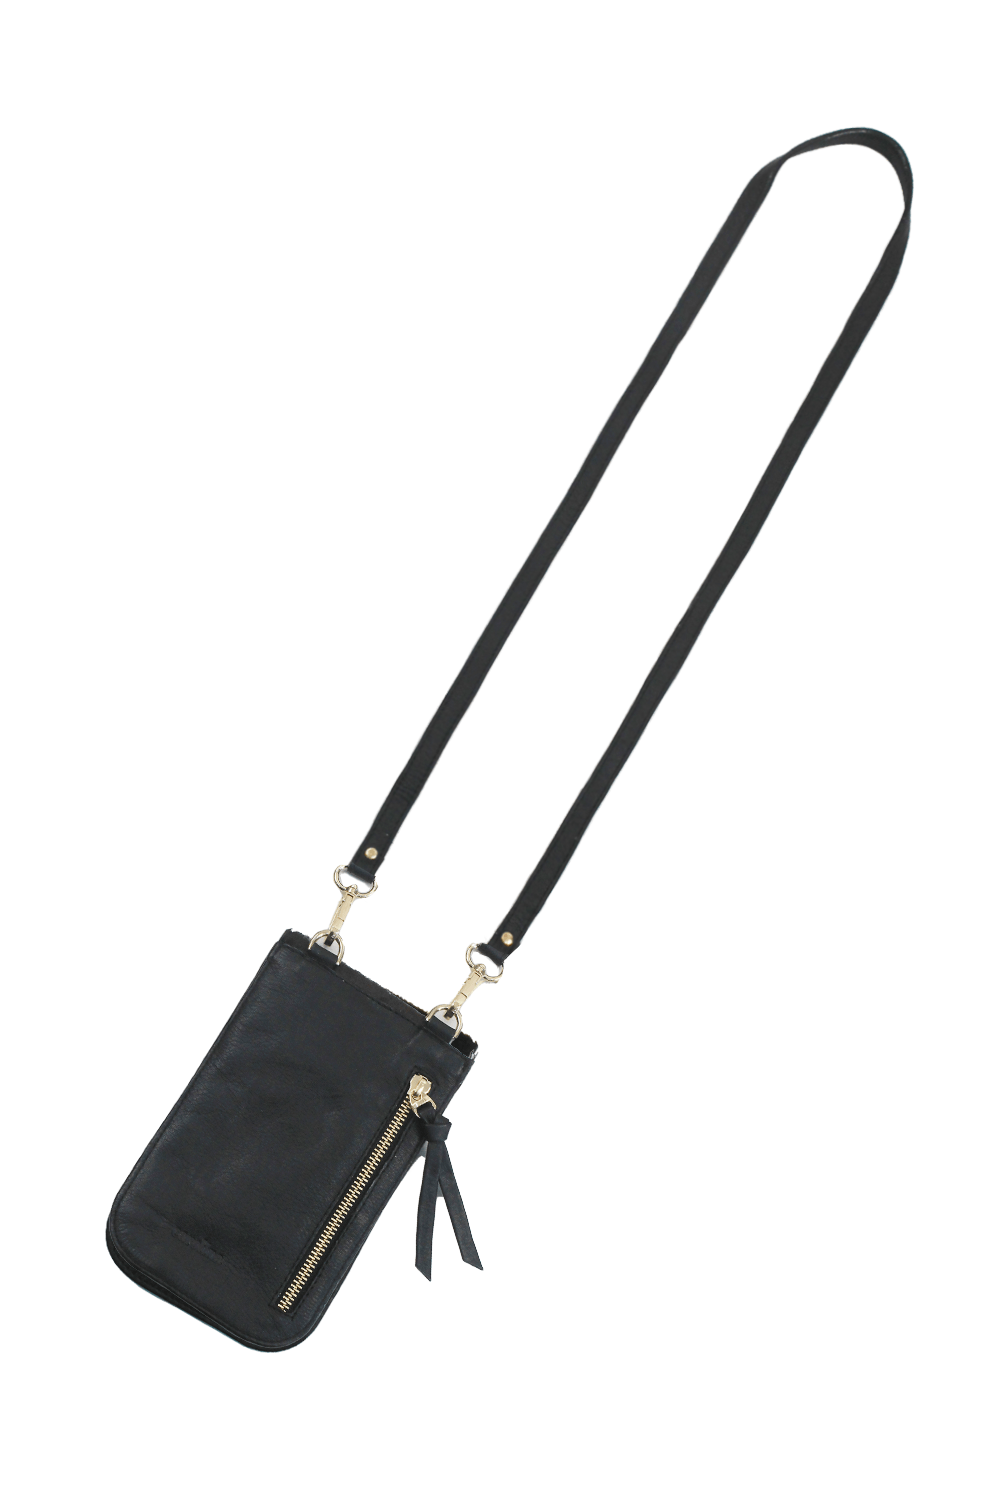 Melina XL Mobile Phone Holder Black and White Cowhide Leather